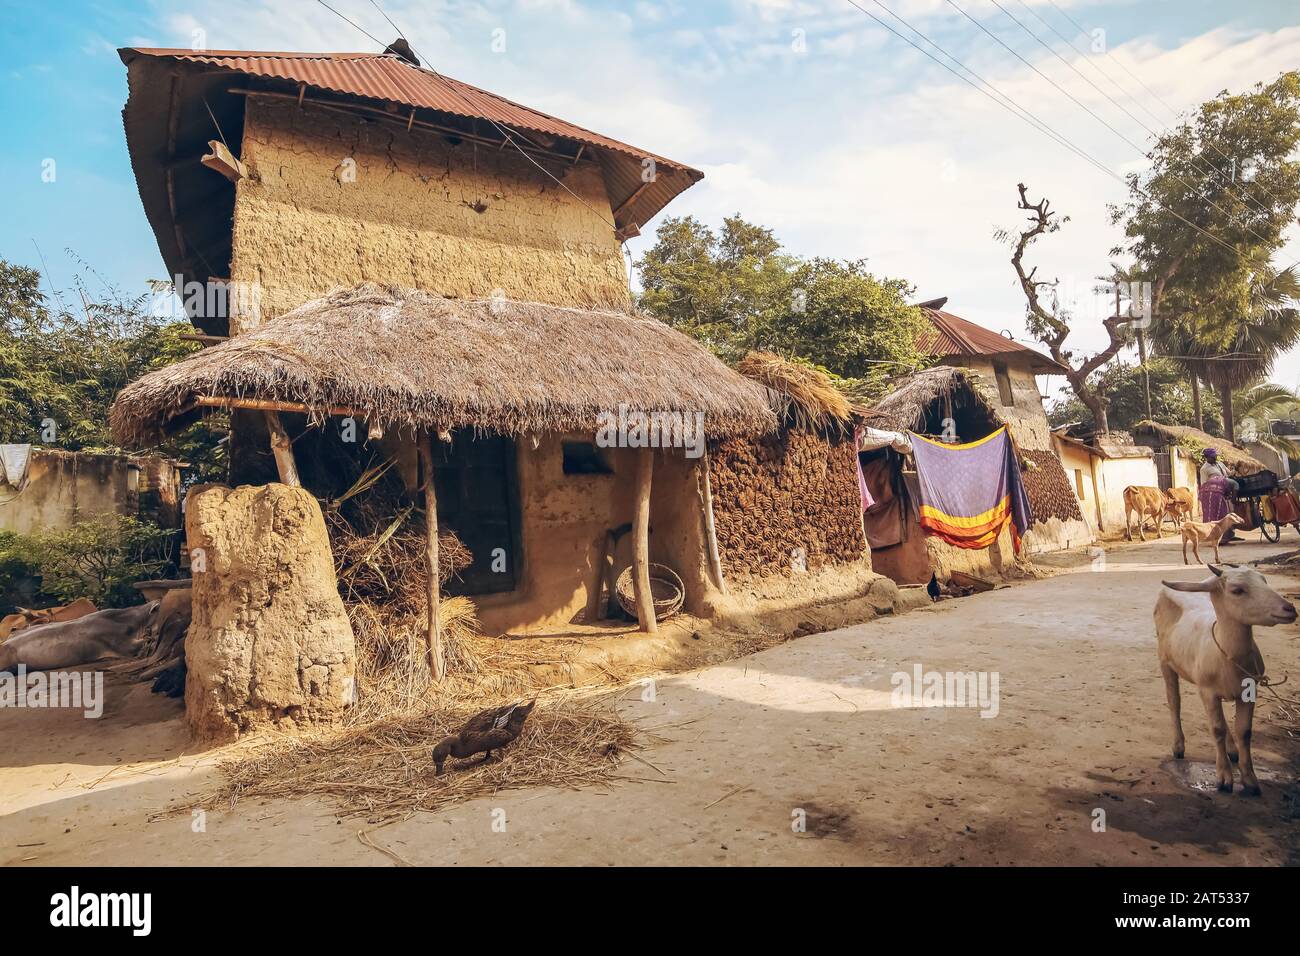 Rural Indian village at Bolpur West Bengal with view of mud hut and unpaved village road with domestic animals by the roadside Stock Photo